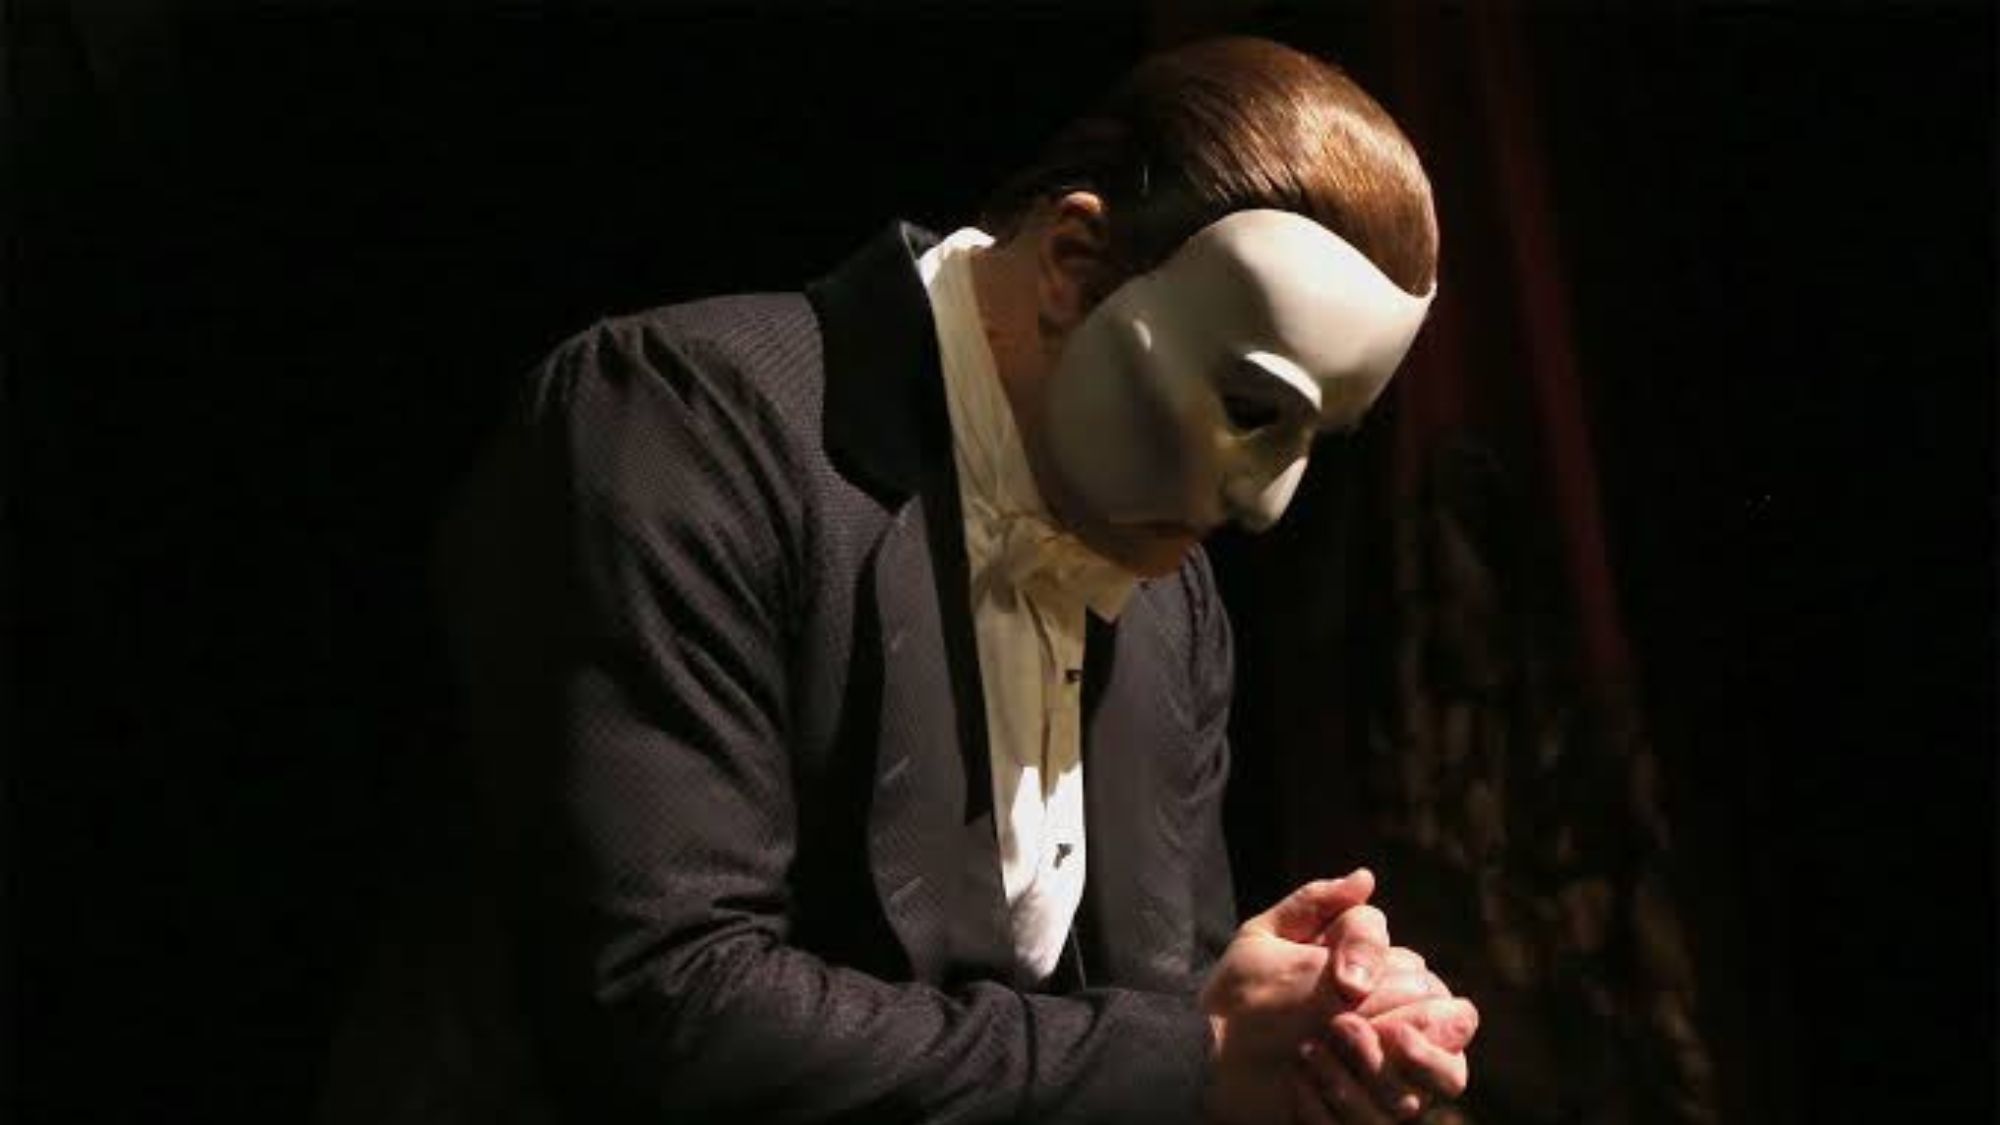 After 35 years, “The Phantom of the Opera” in Broadway makes its final curtain call